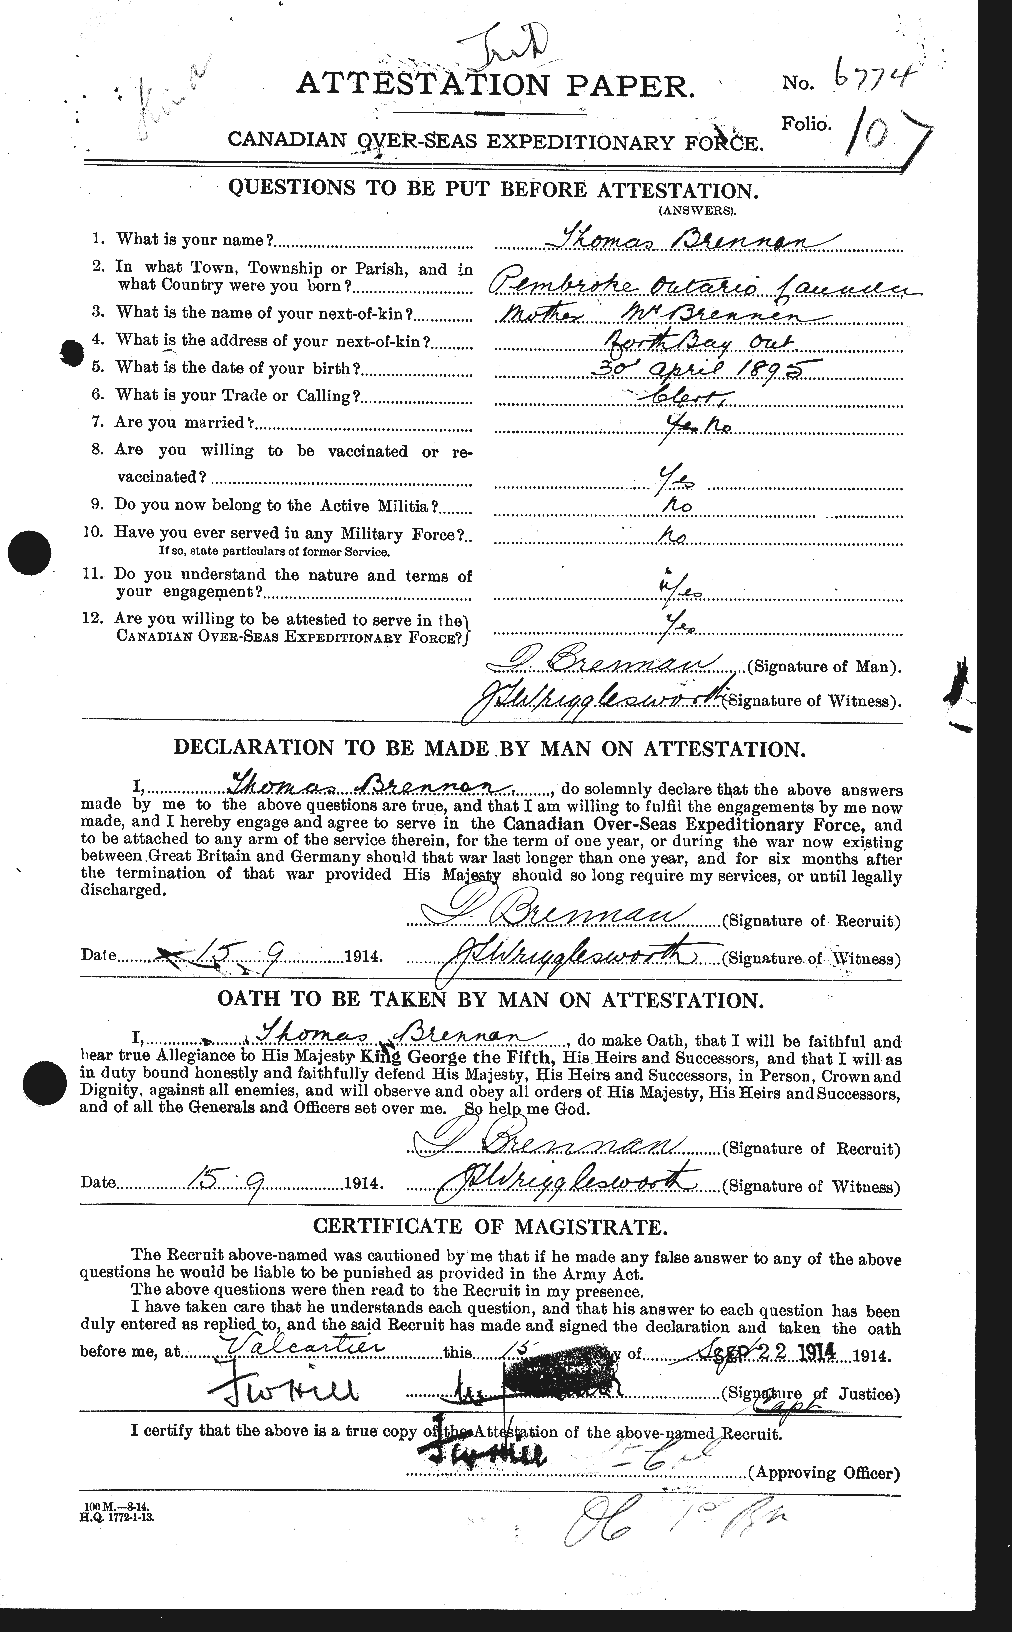 Personnel Records of the First World War - CEF 260172a